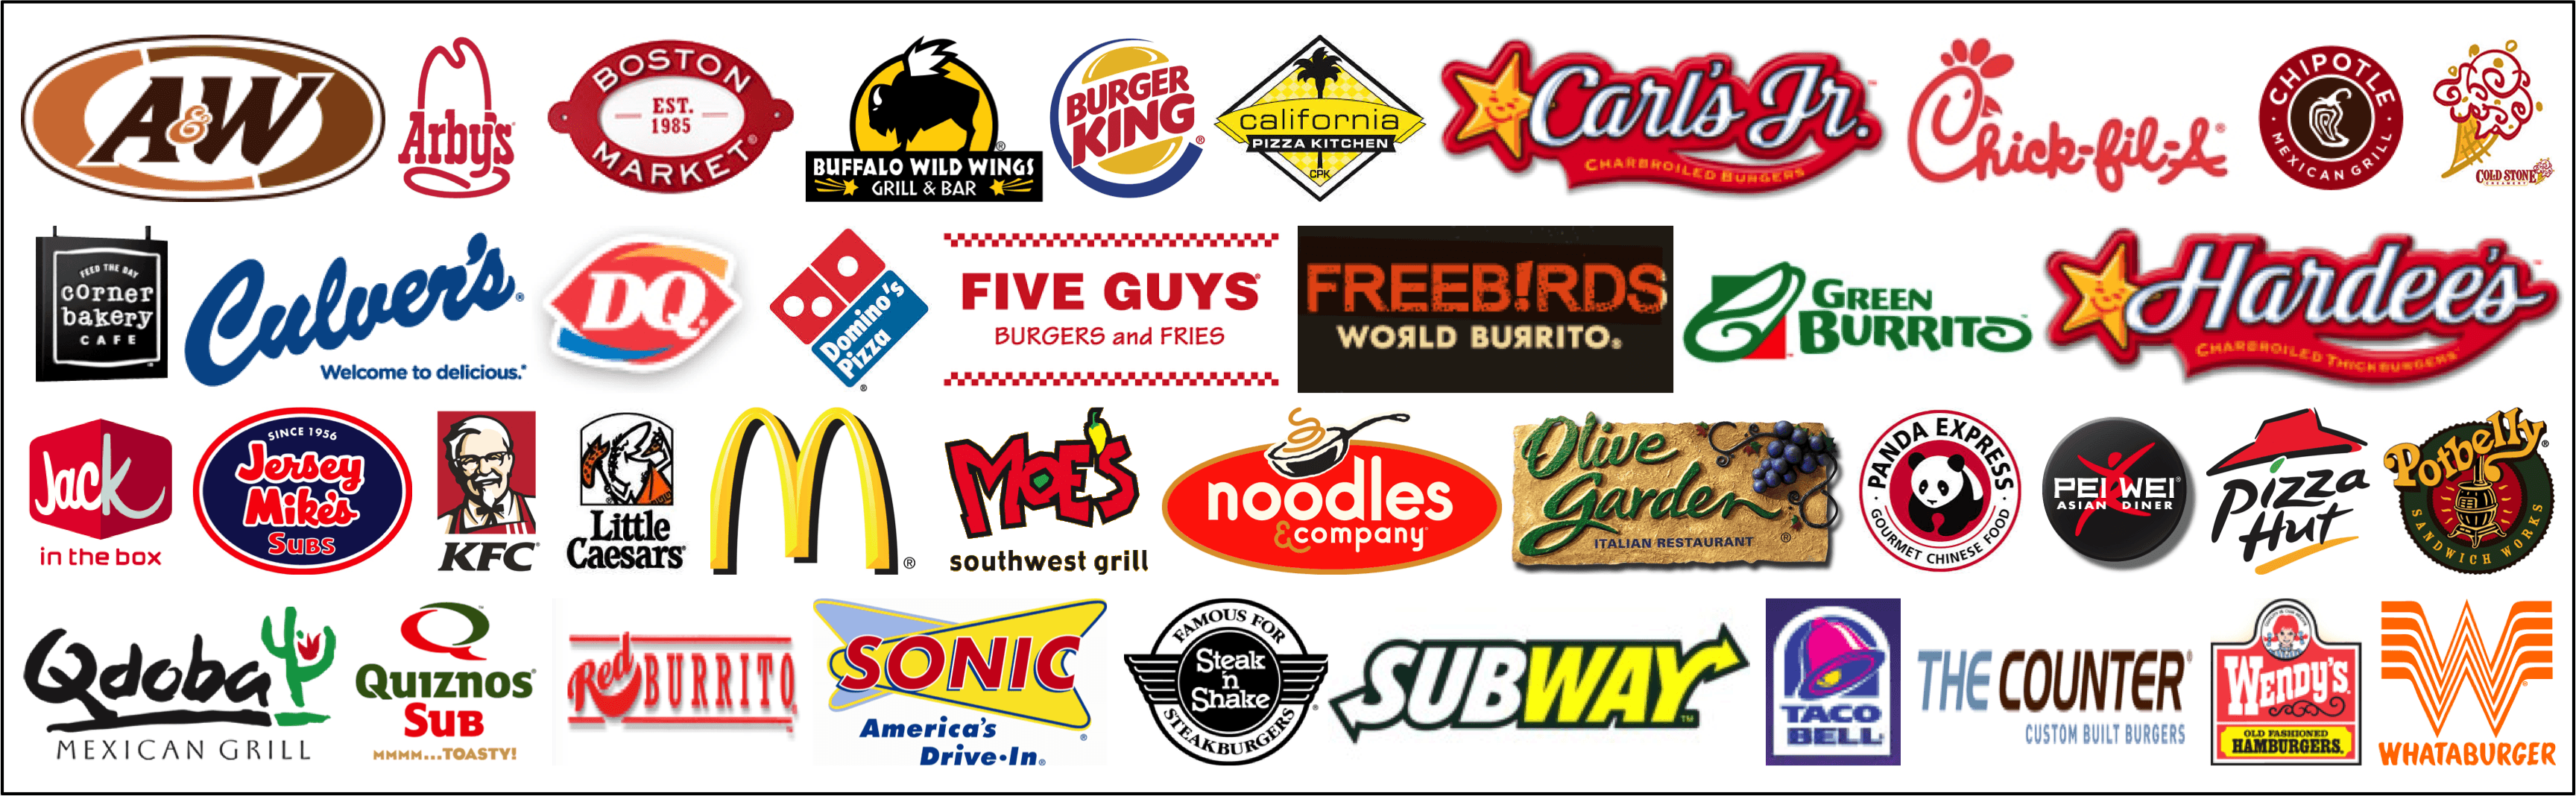 American Fast Food Logo - American Fast Food Restaurants - How many have you tried?